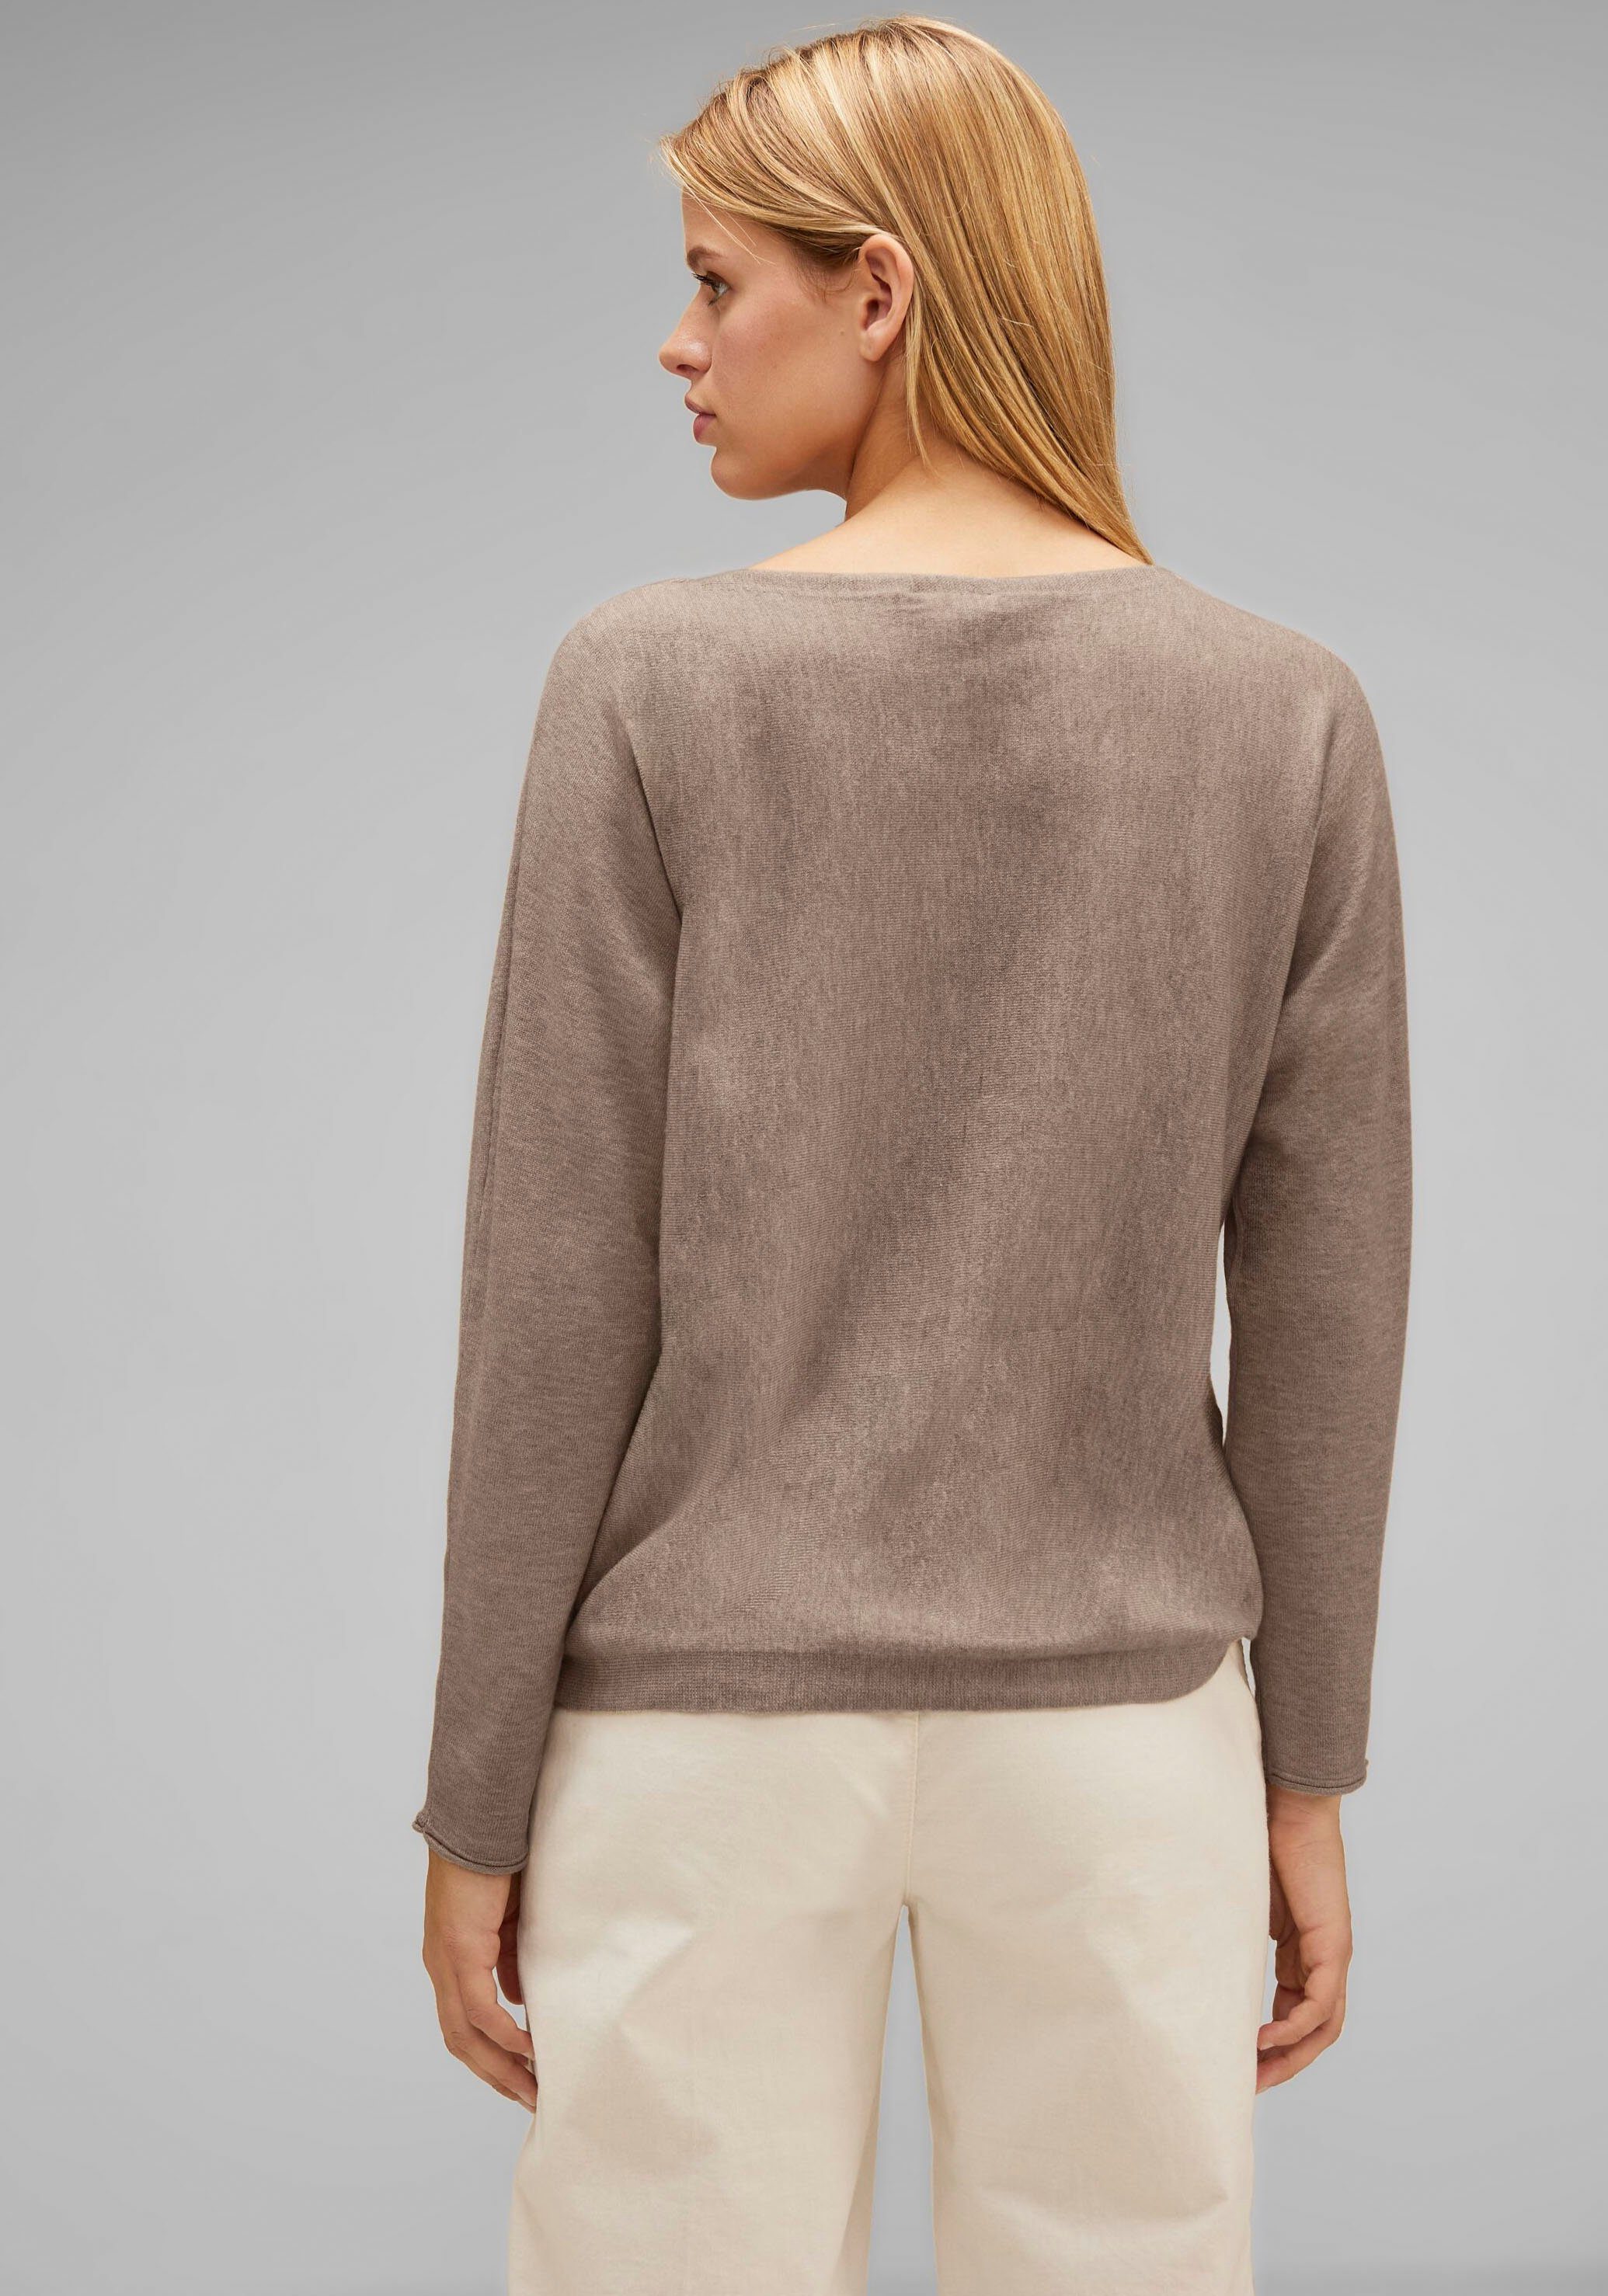 STREET ONE Strickpullover Unifarbe sand bleached in